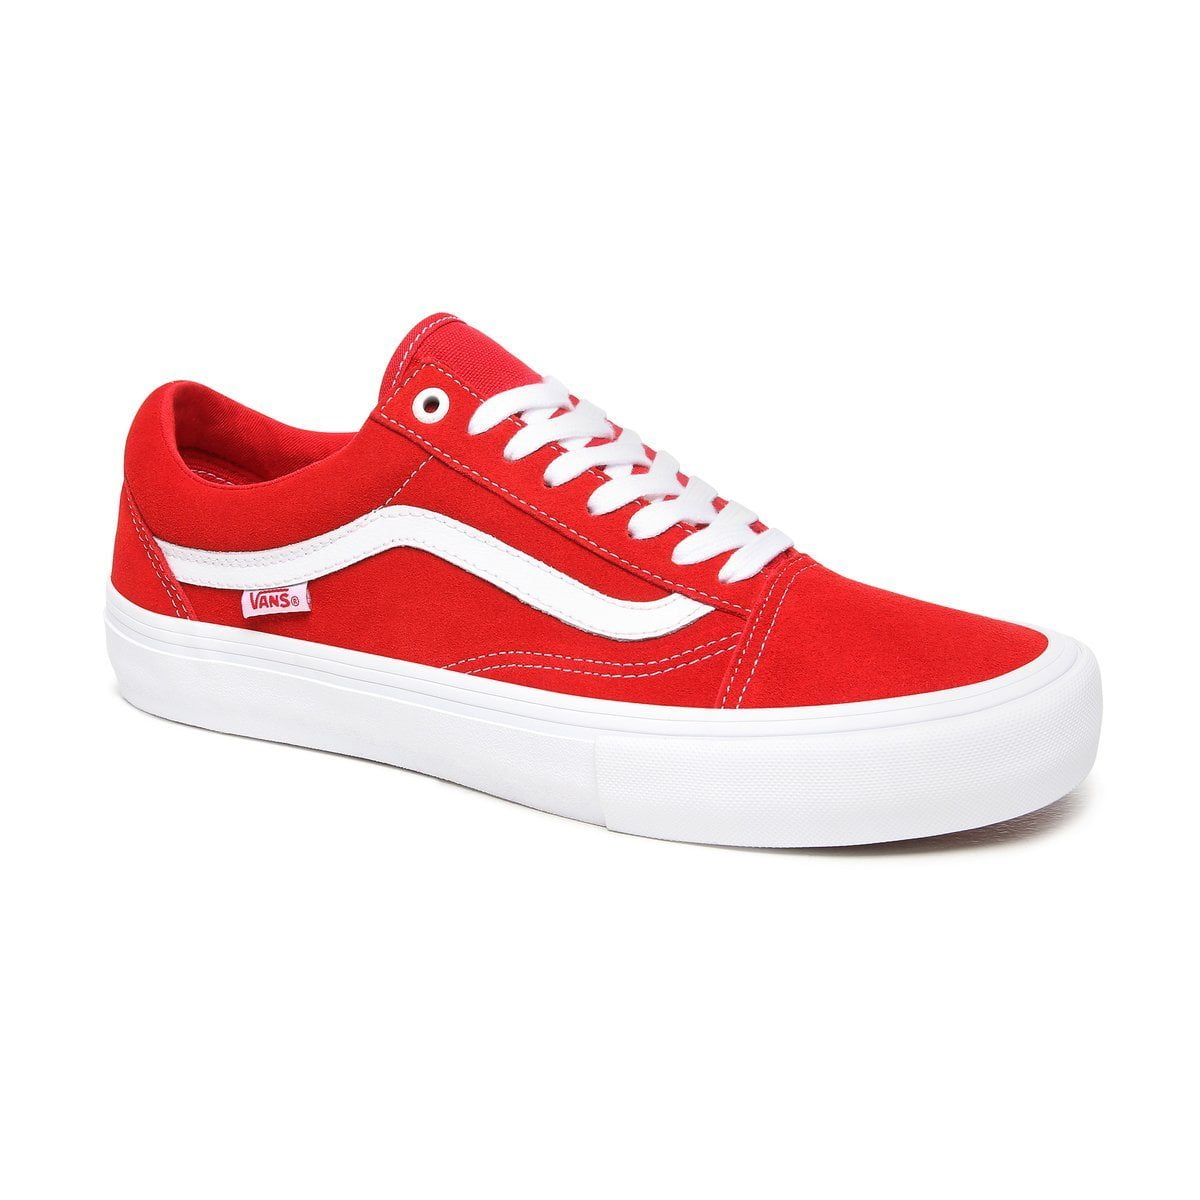 Old Skool Pro Red & White Suede Skate Shoes 